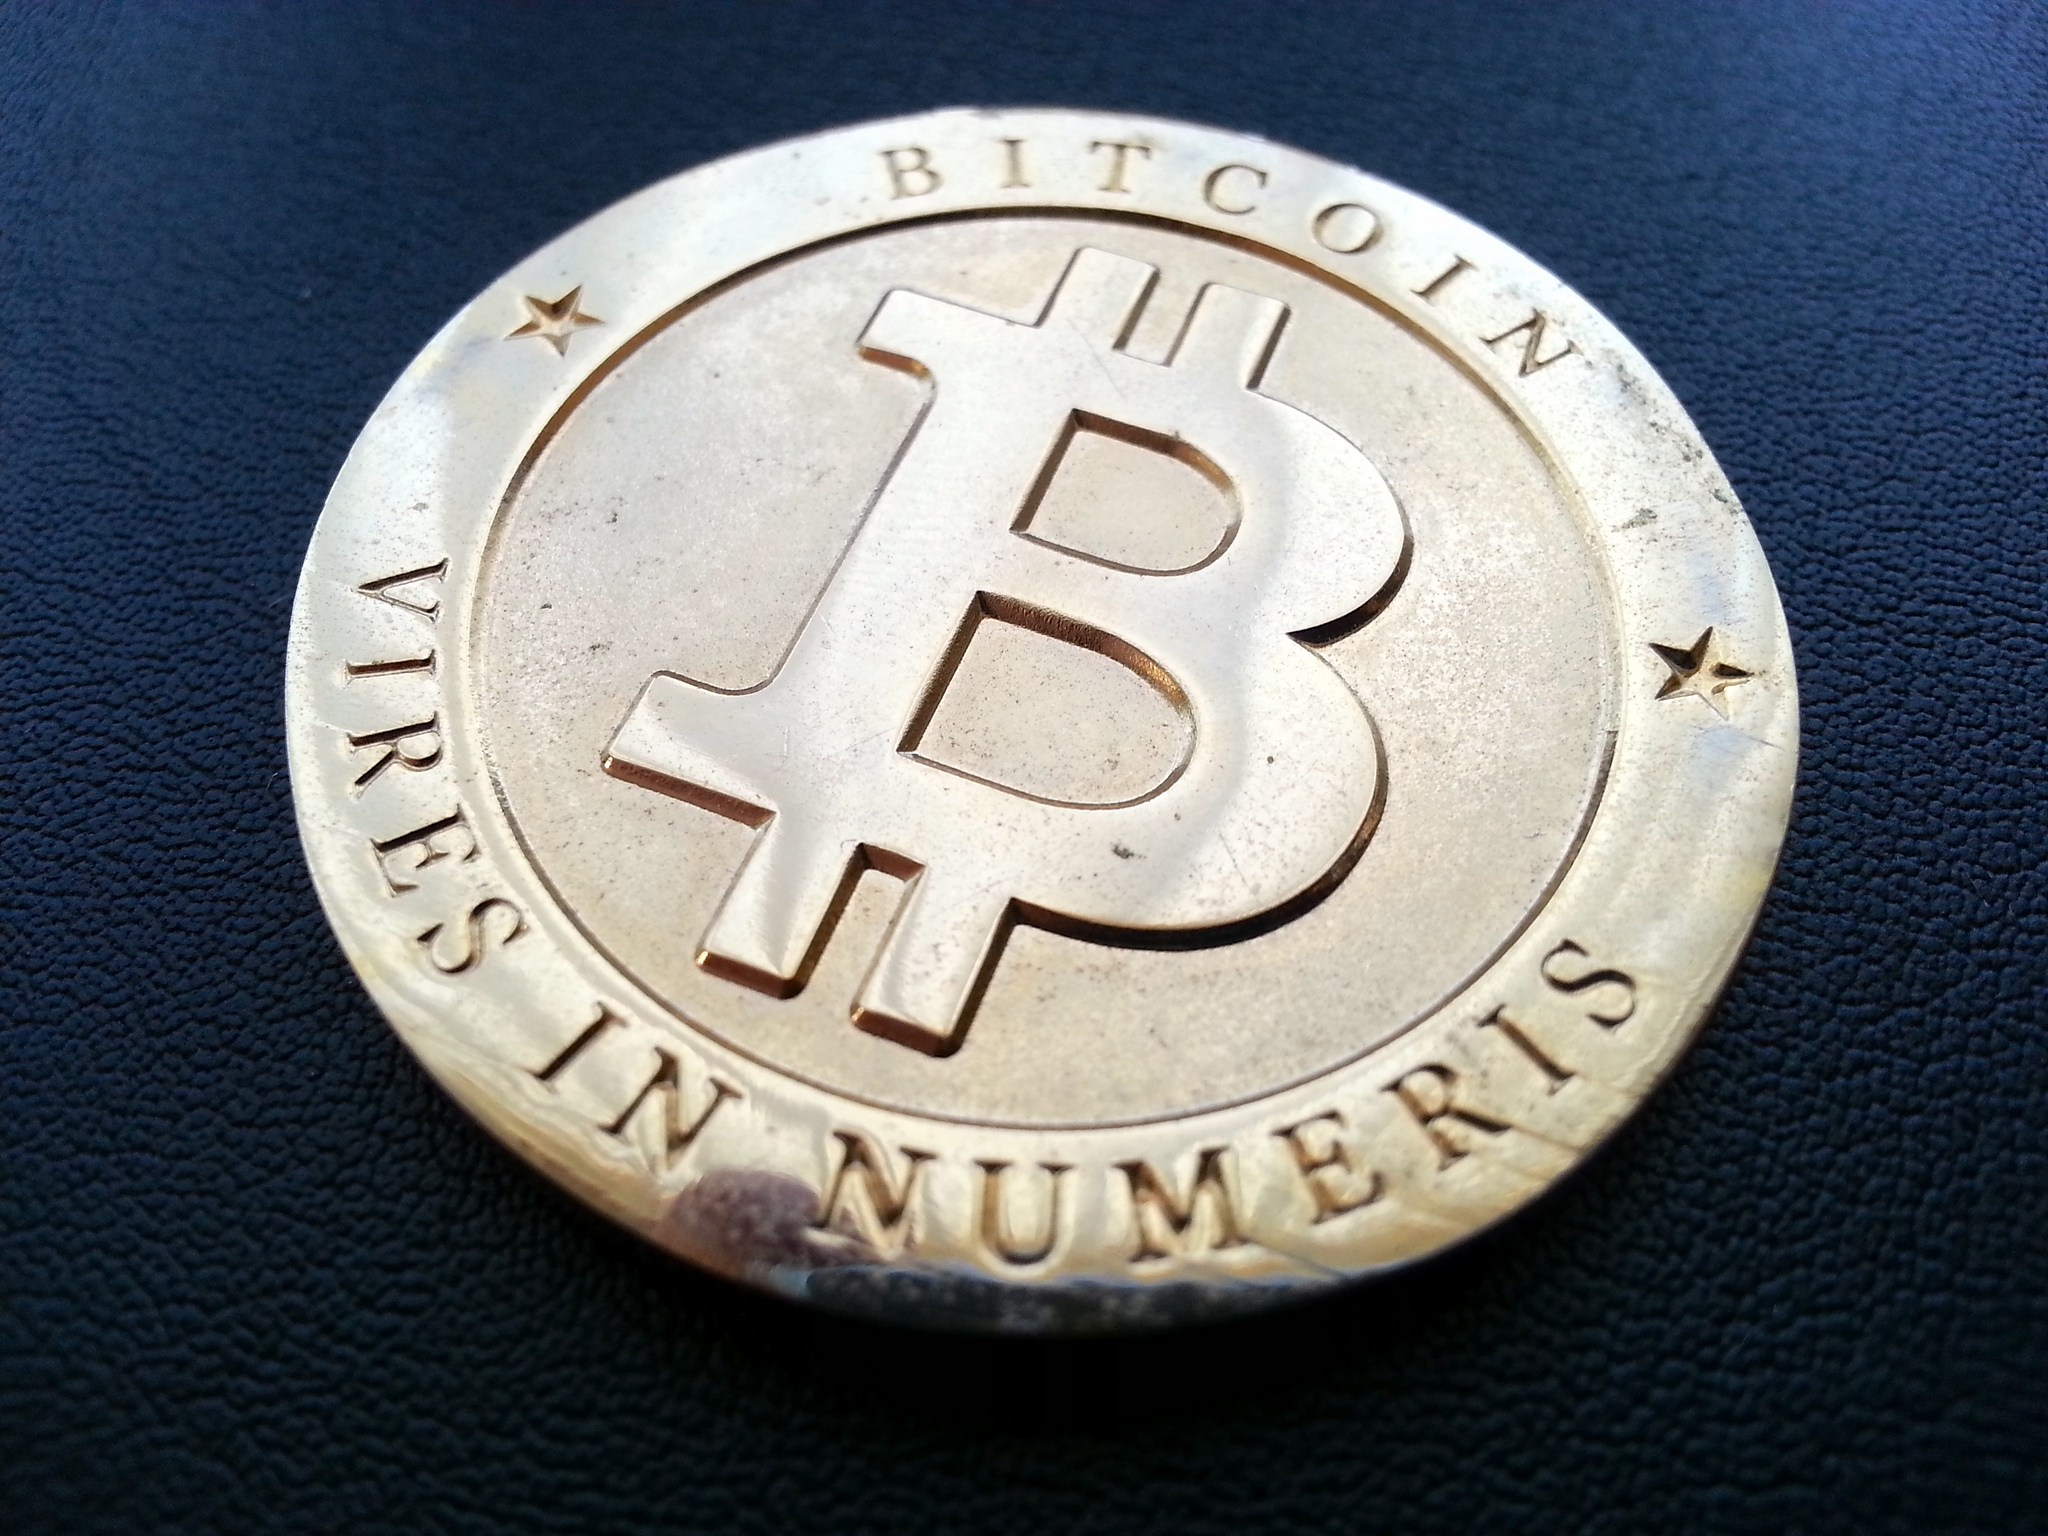 Bitcoin – Get Rich or Mine Trying